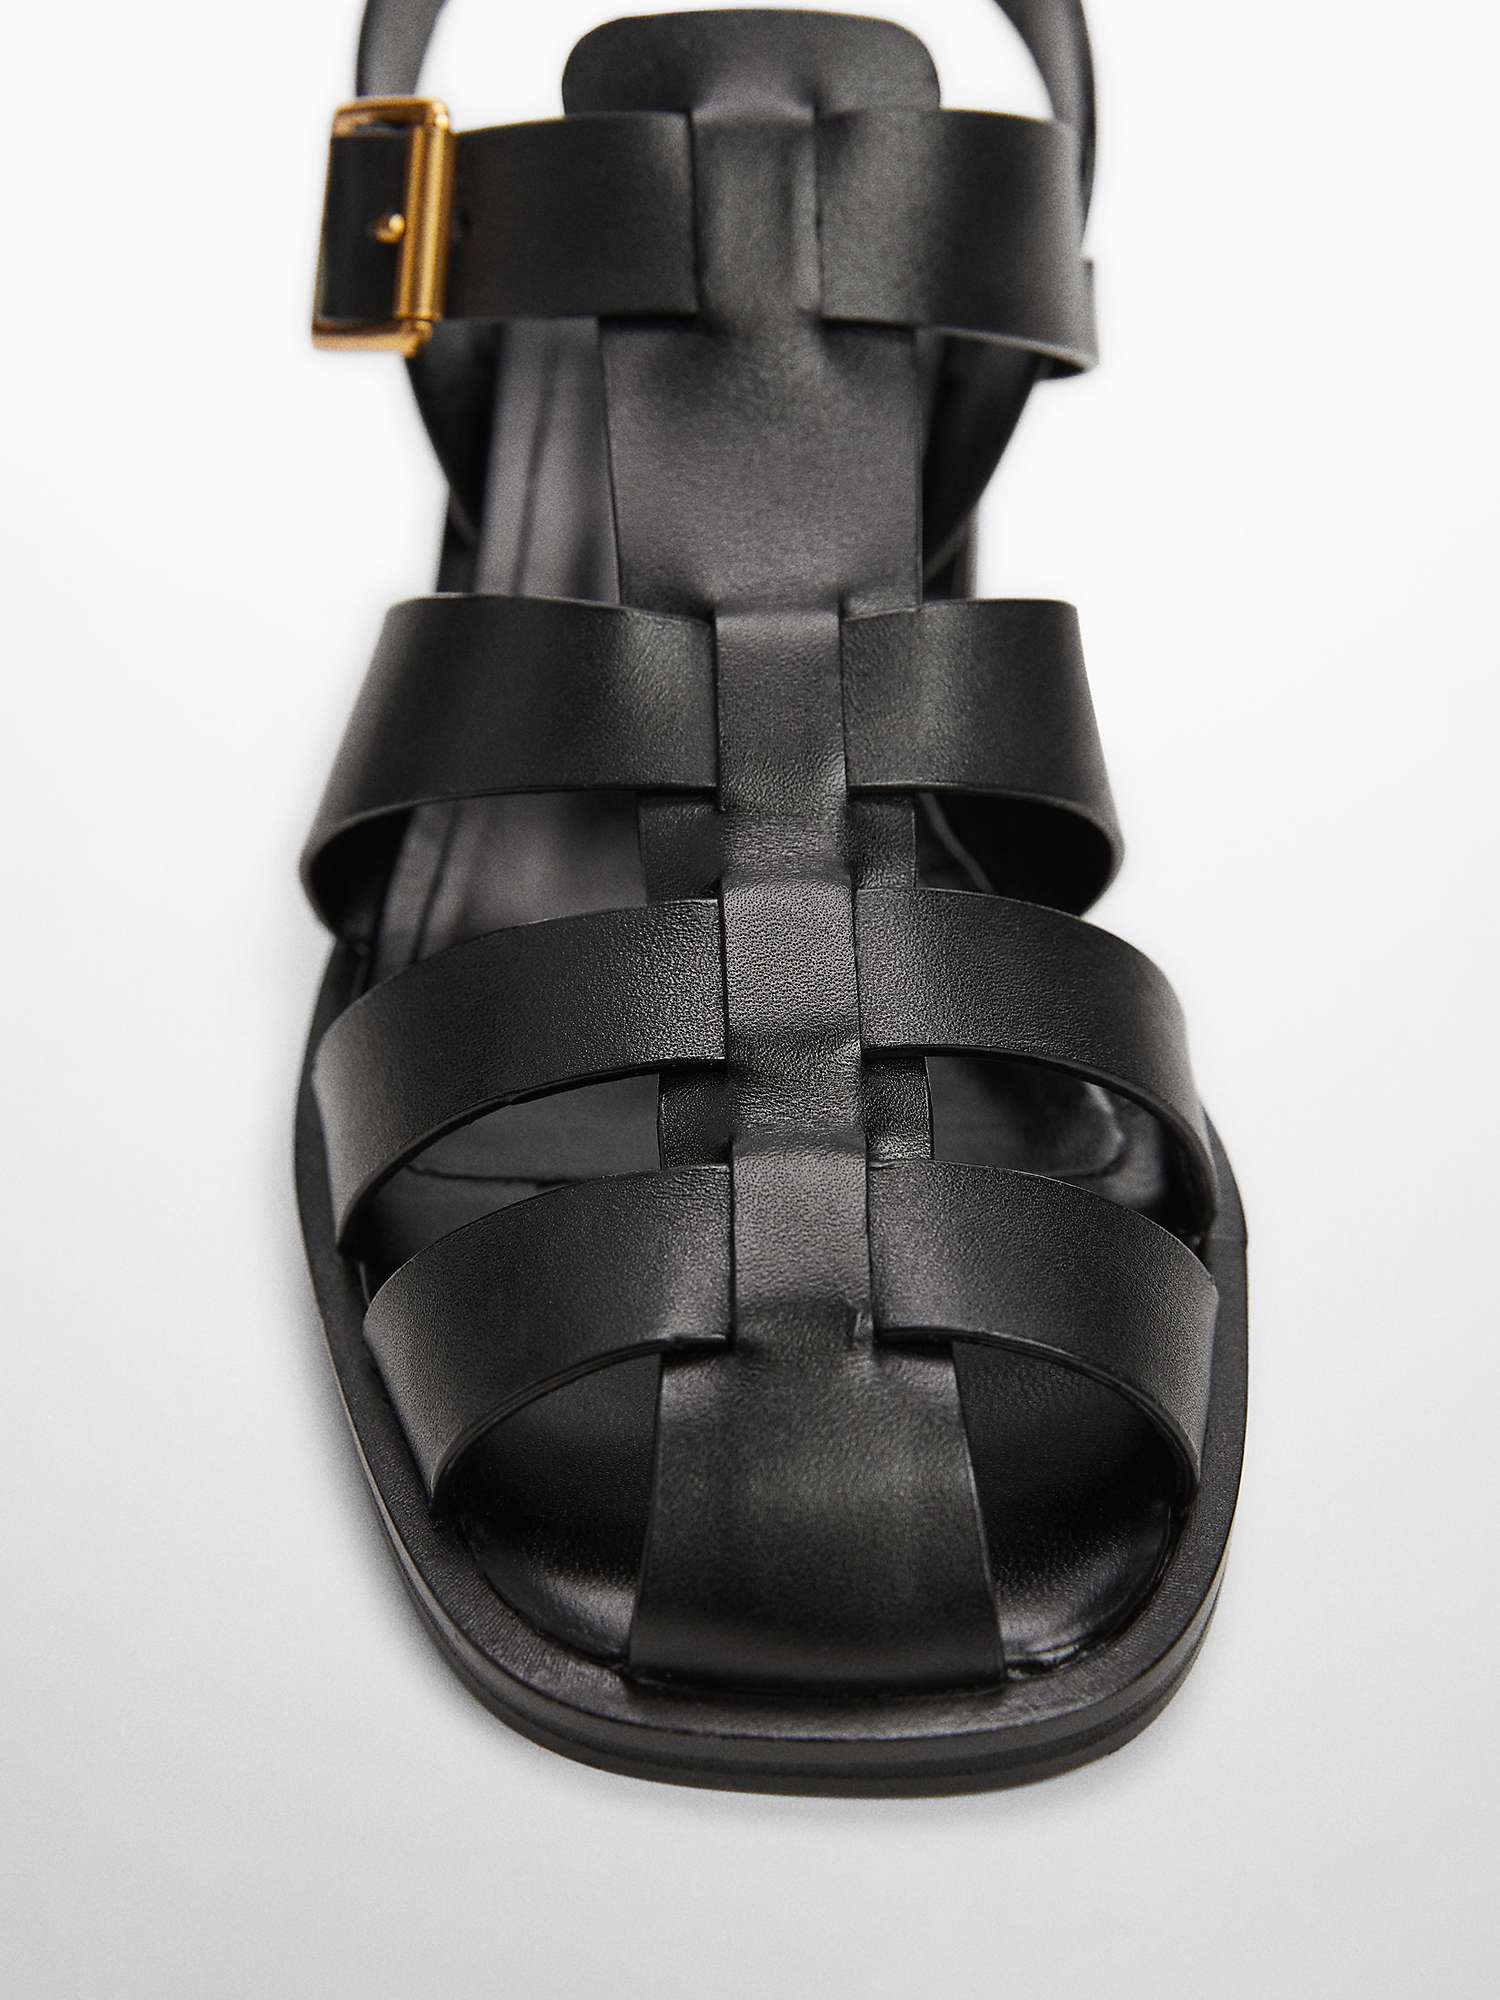 Buy Mango Fisher Leather Jelly Shoes, Black Online at johnlewis.com